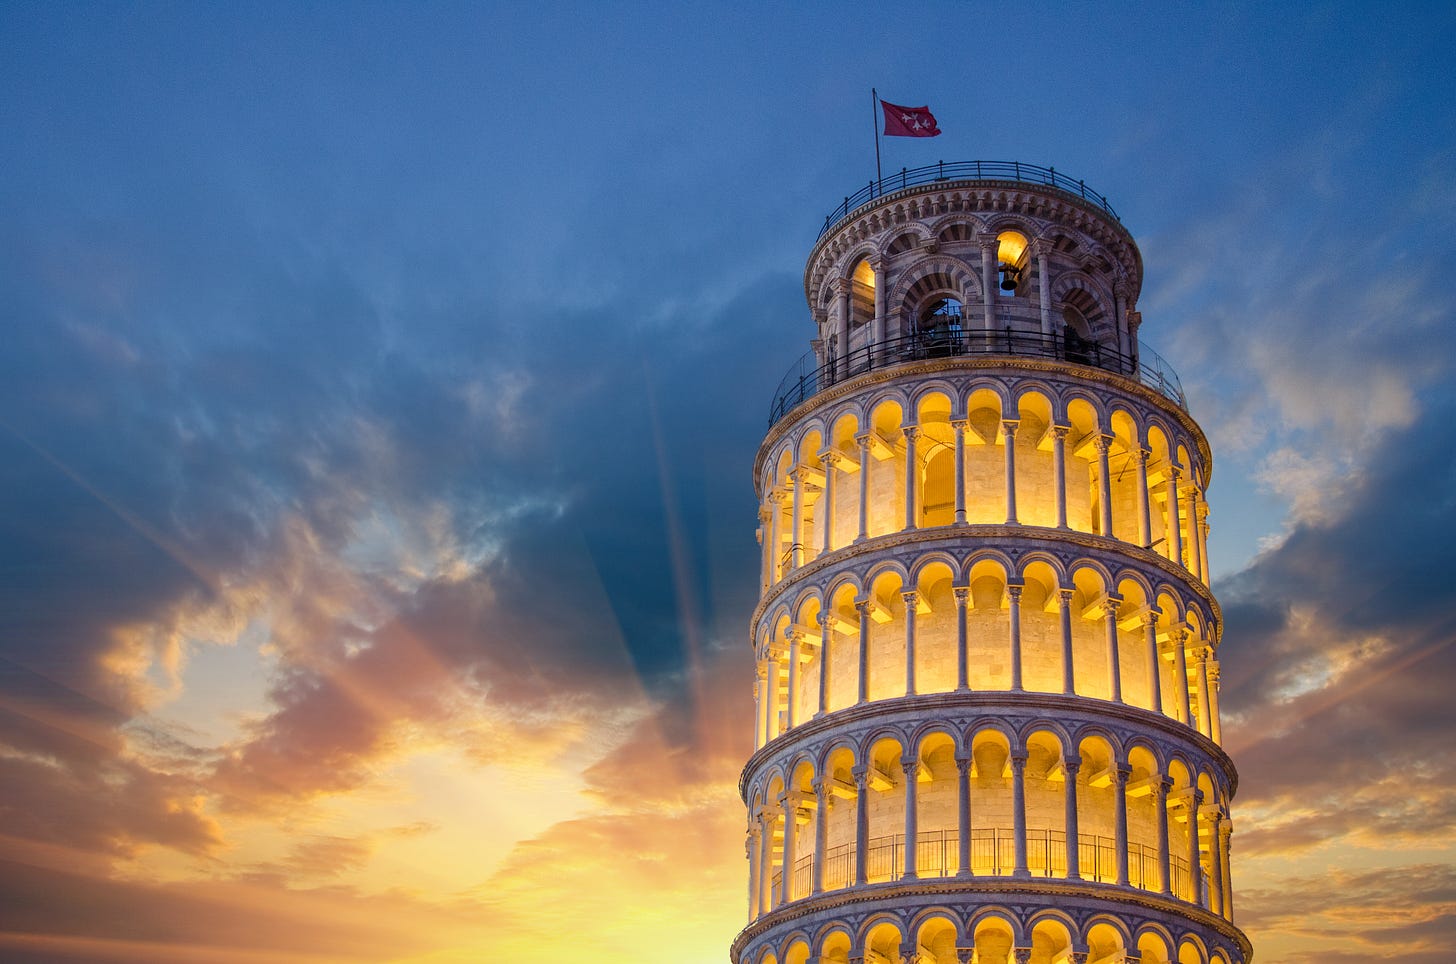 Leaning Tower of Pisa at dawn.